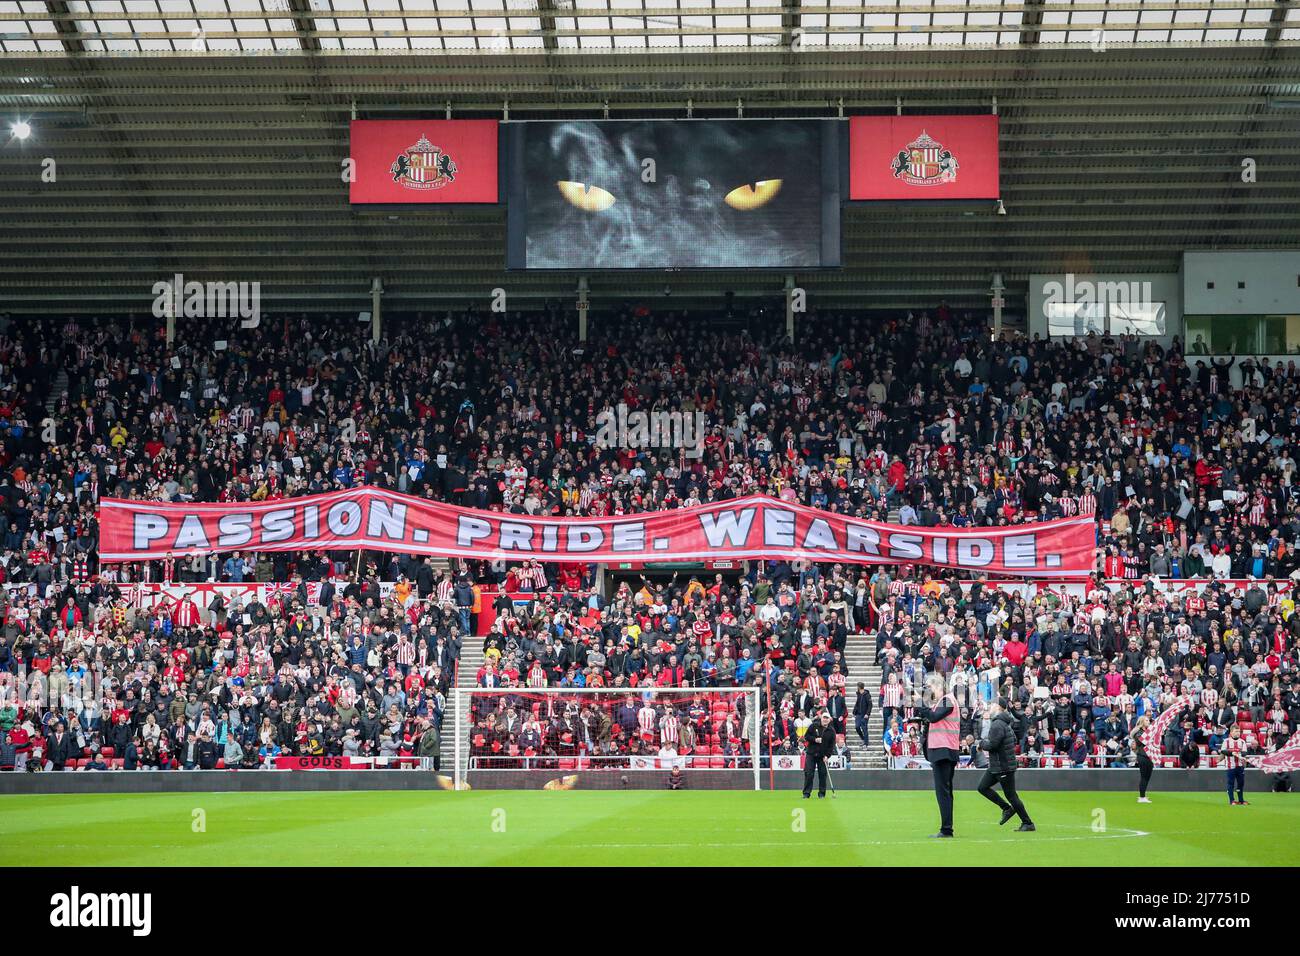 Passion, Pride, Wearside is held up by the Sunderland supporters on a banner ahead of the game Stock Photo